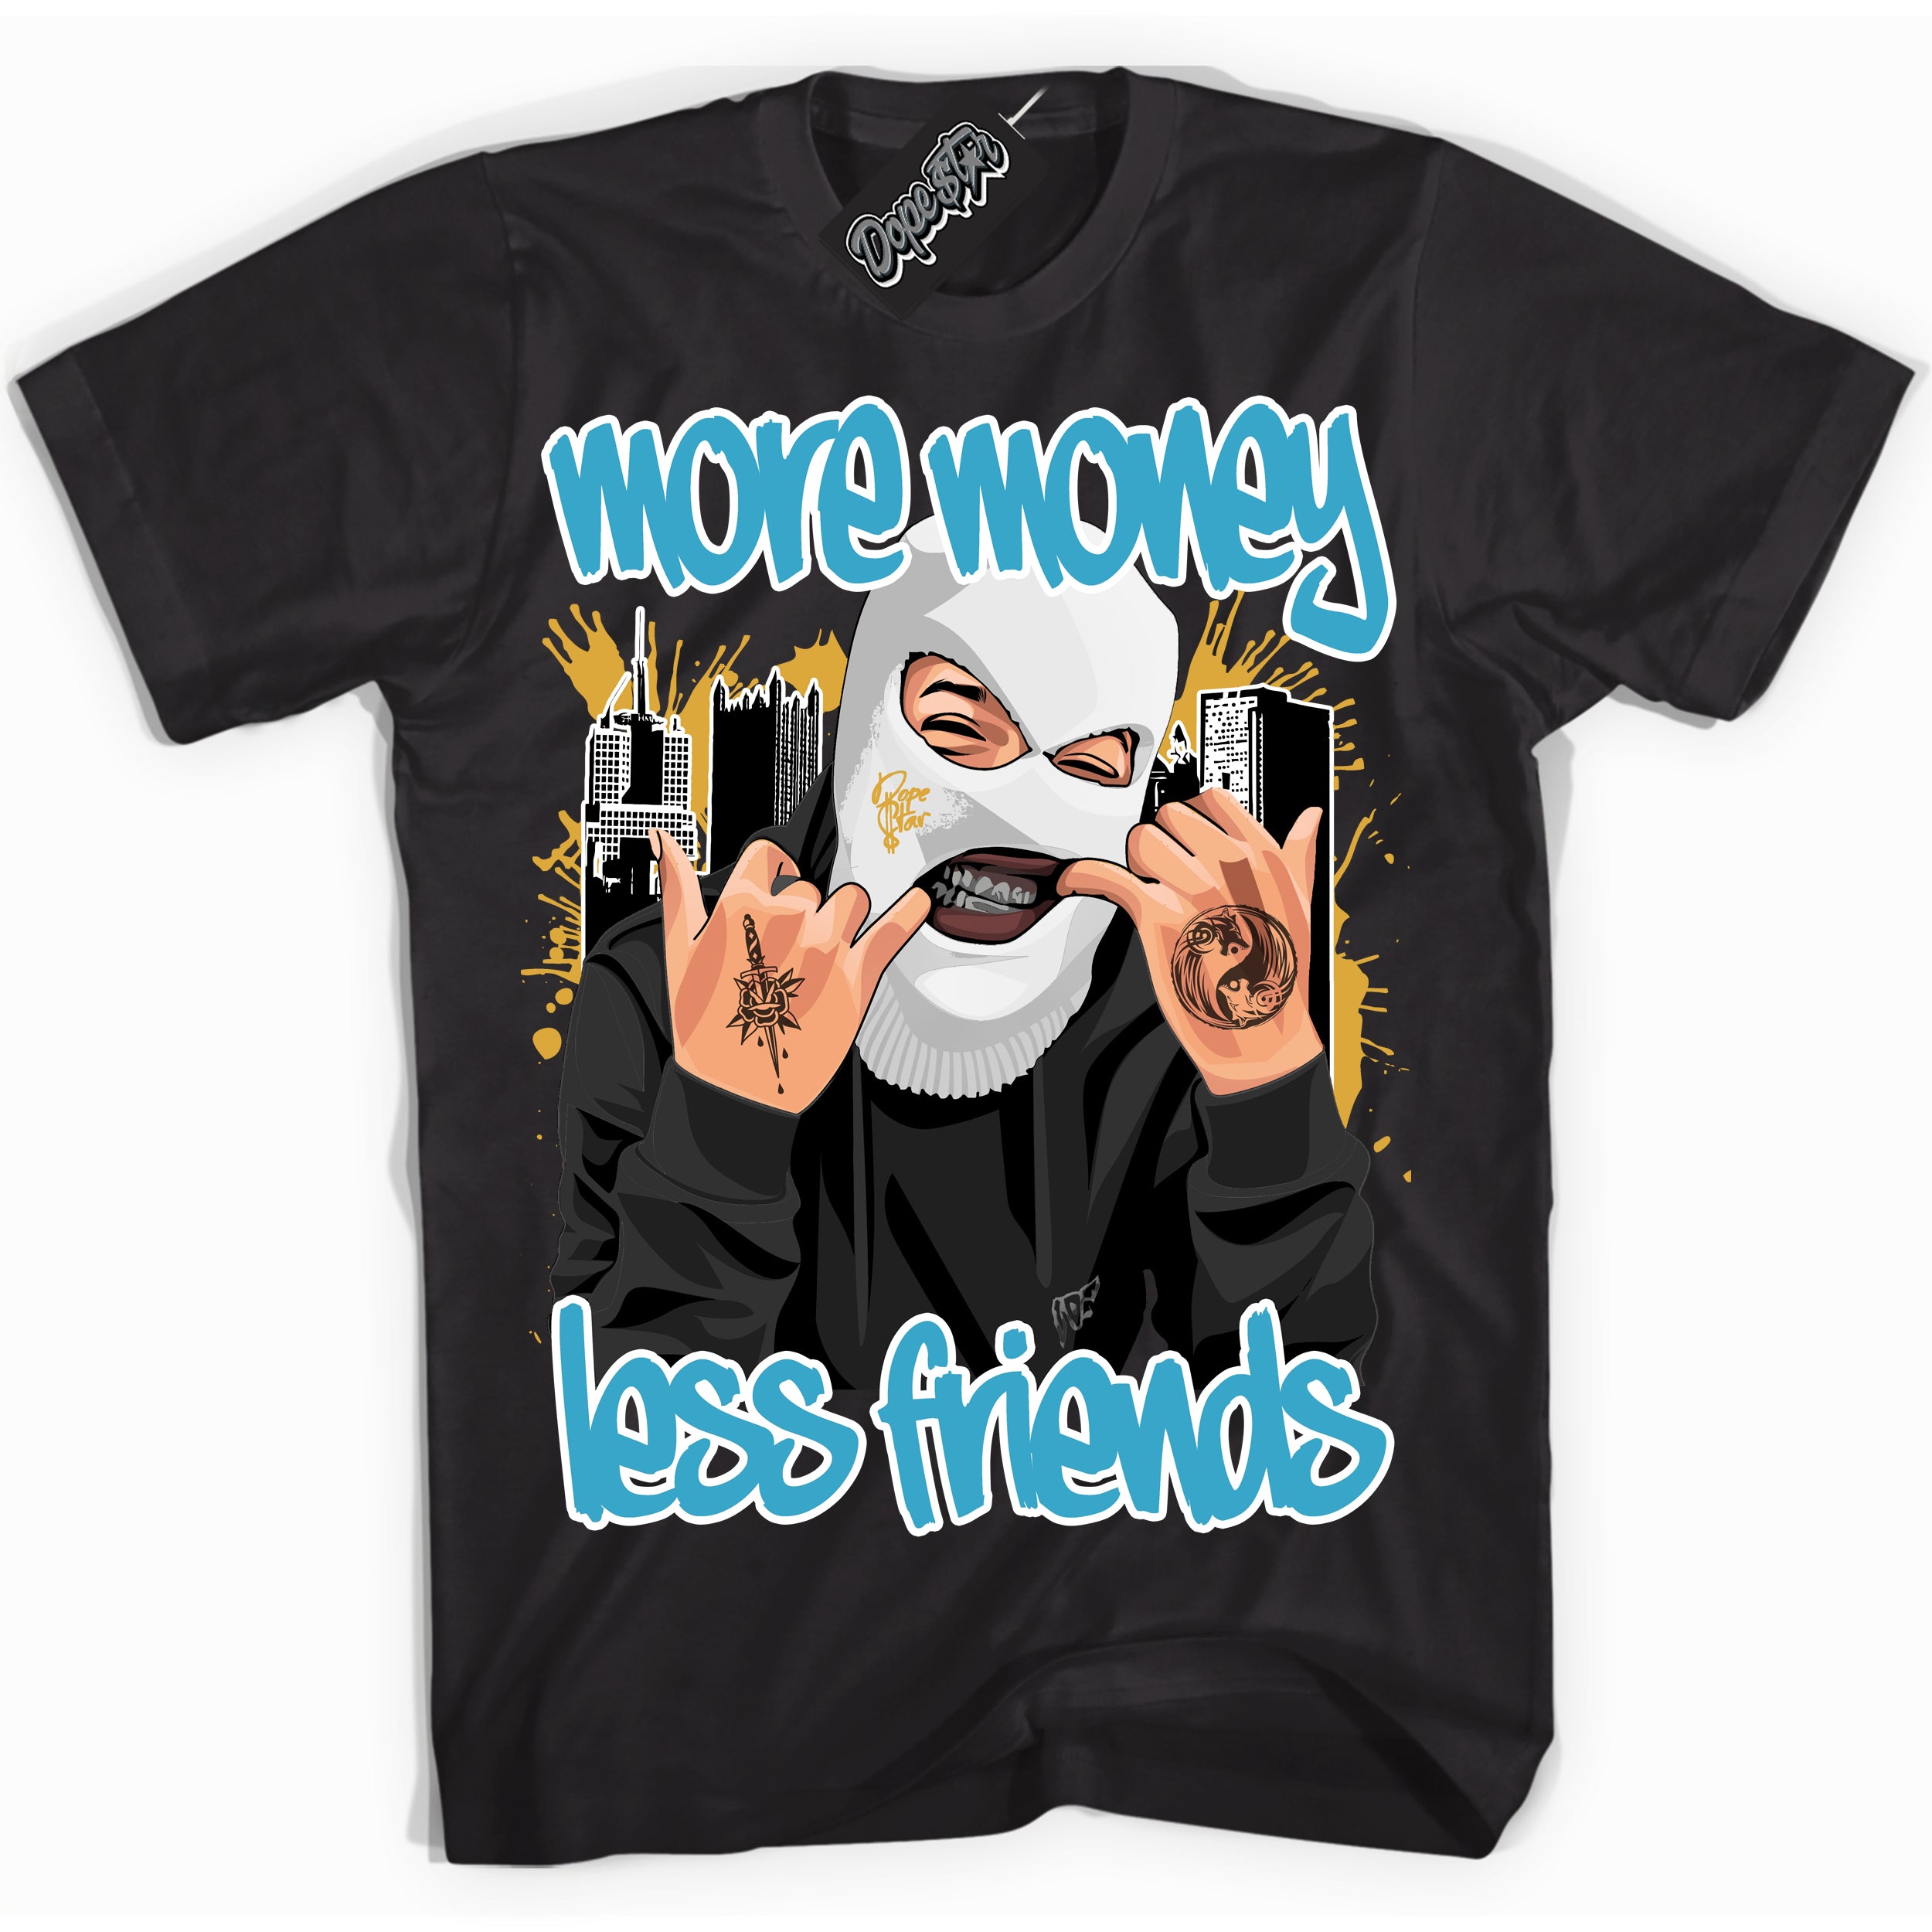 Cool Black Shirt with “ More Money Less Friends” design that perfectly matches Aqua 5s Sneakers.